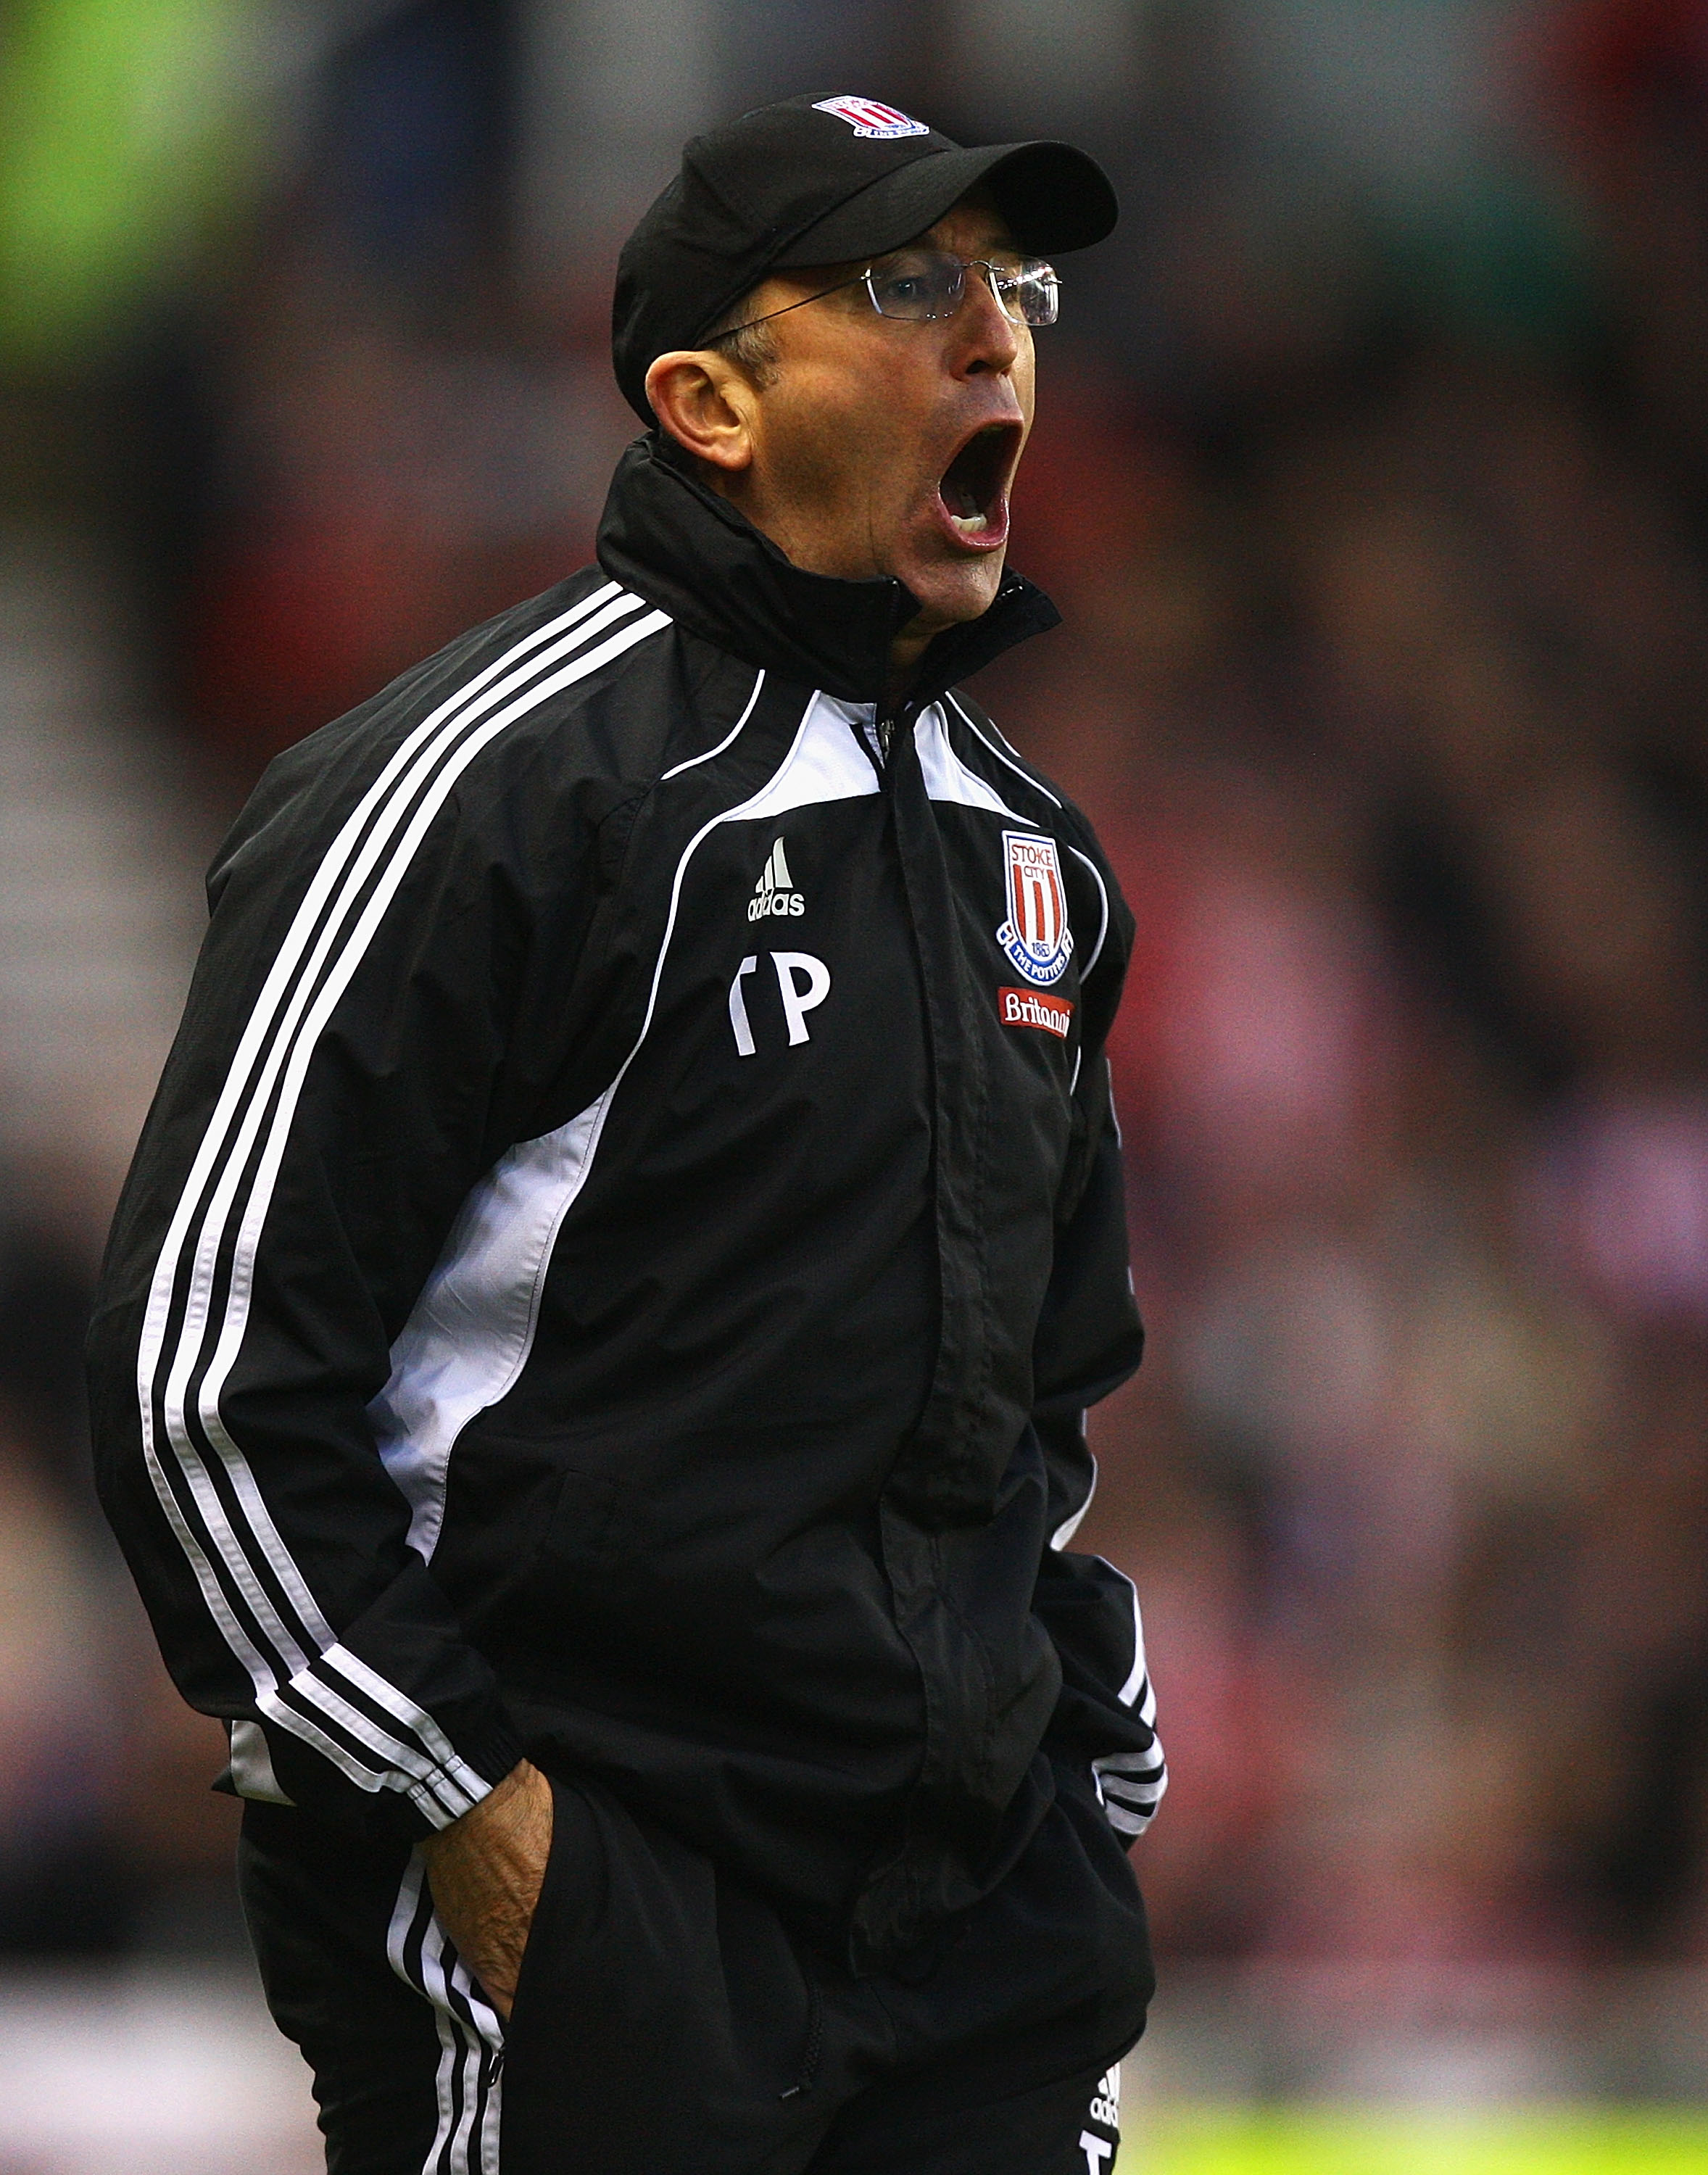 STOKE ON TRENT, ENGLAND - DECEMBER 11:  Tony Pulis, manager of Stoke City shows his frustration, as a chance on goal is missed during the Barclays Premier League match between Stoke City and Blackpool at Britannia Stadium on December 11, 2010 in Stoke on